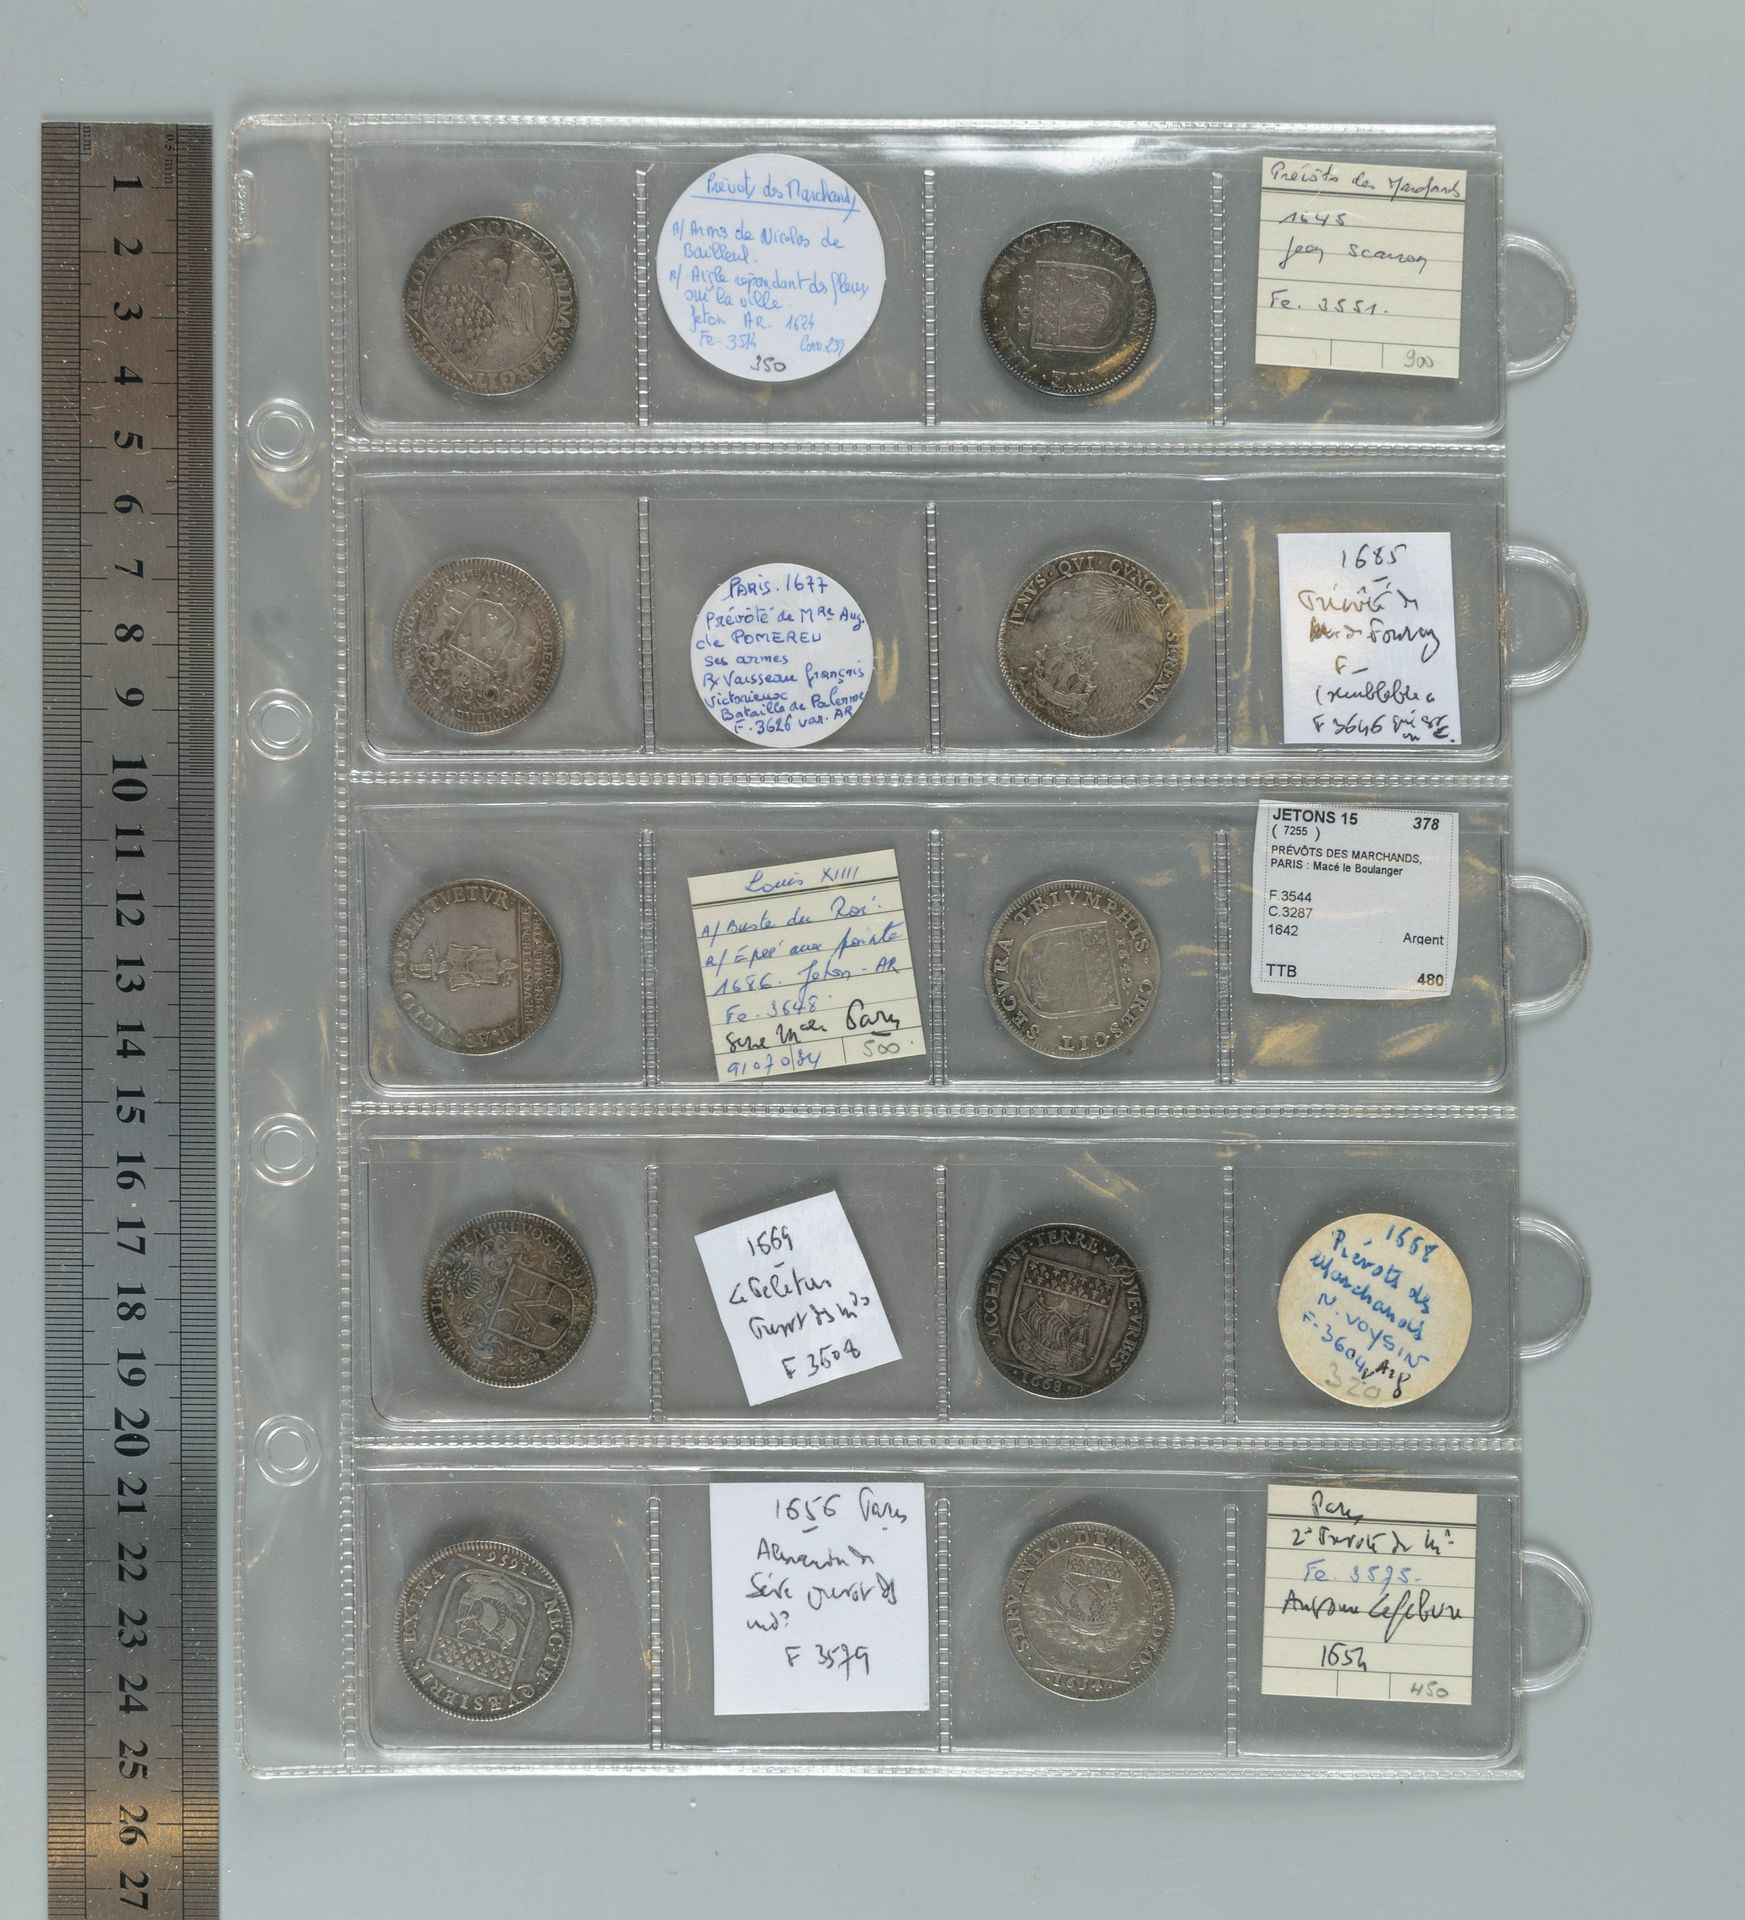 Null Paris, aldermen and provosts. Binder with 97 silver tokens